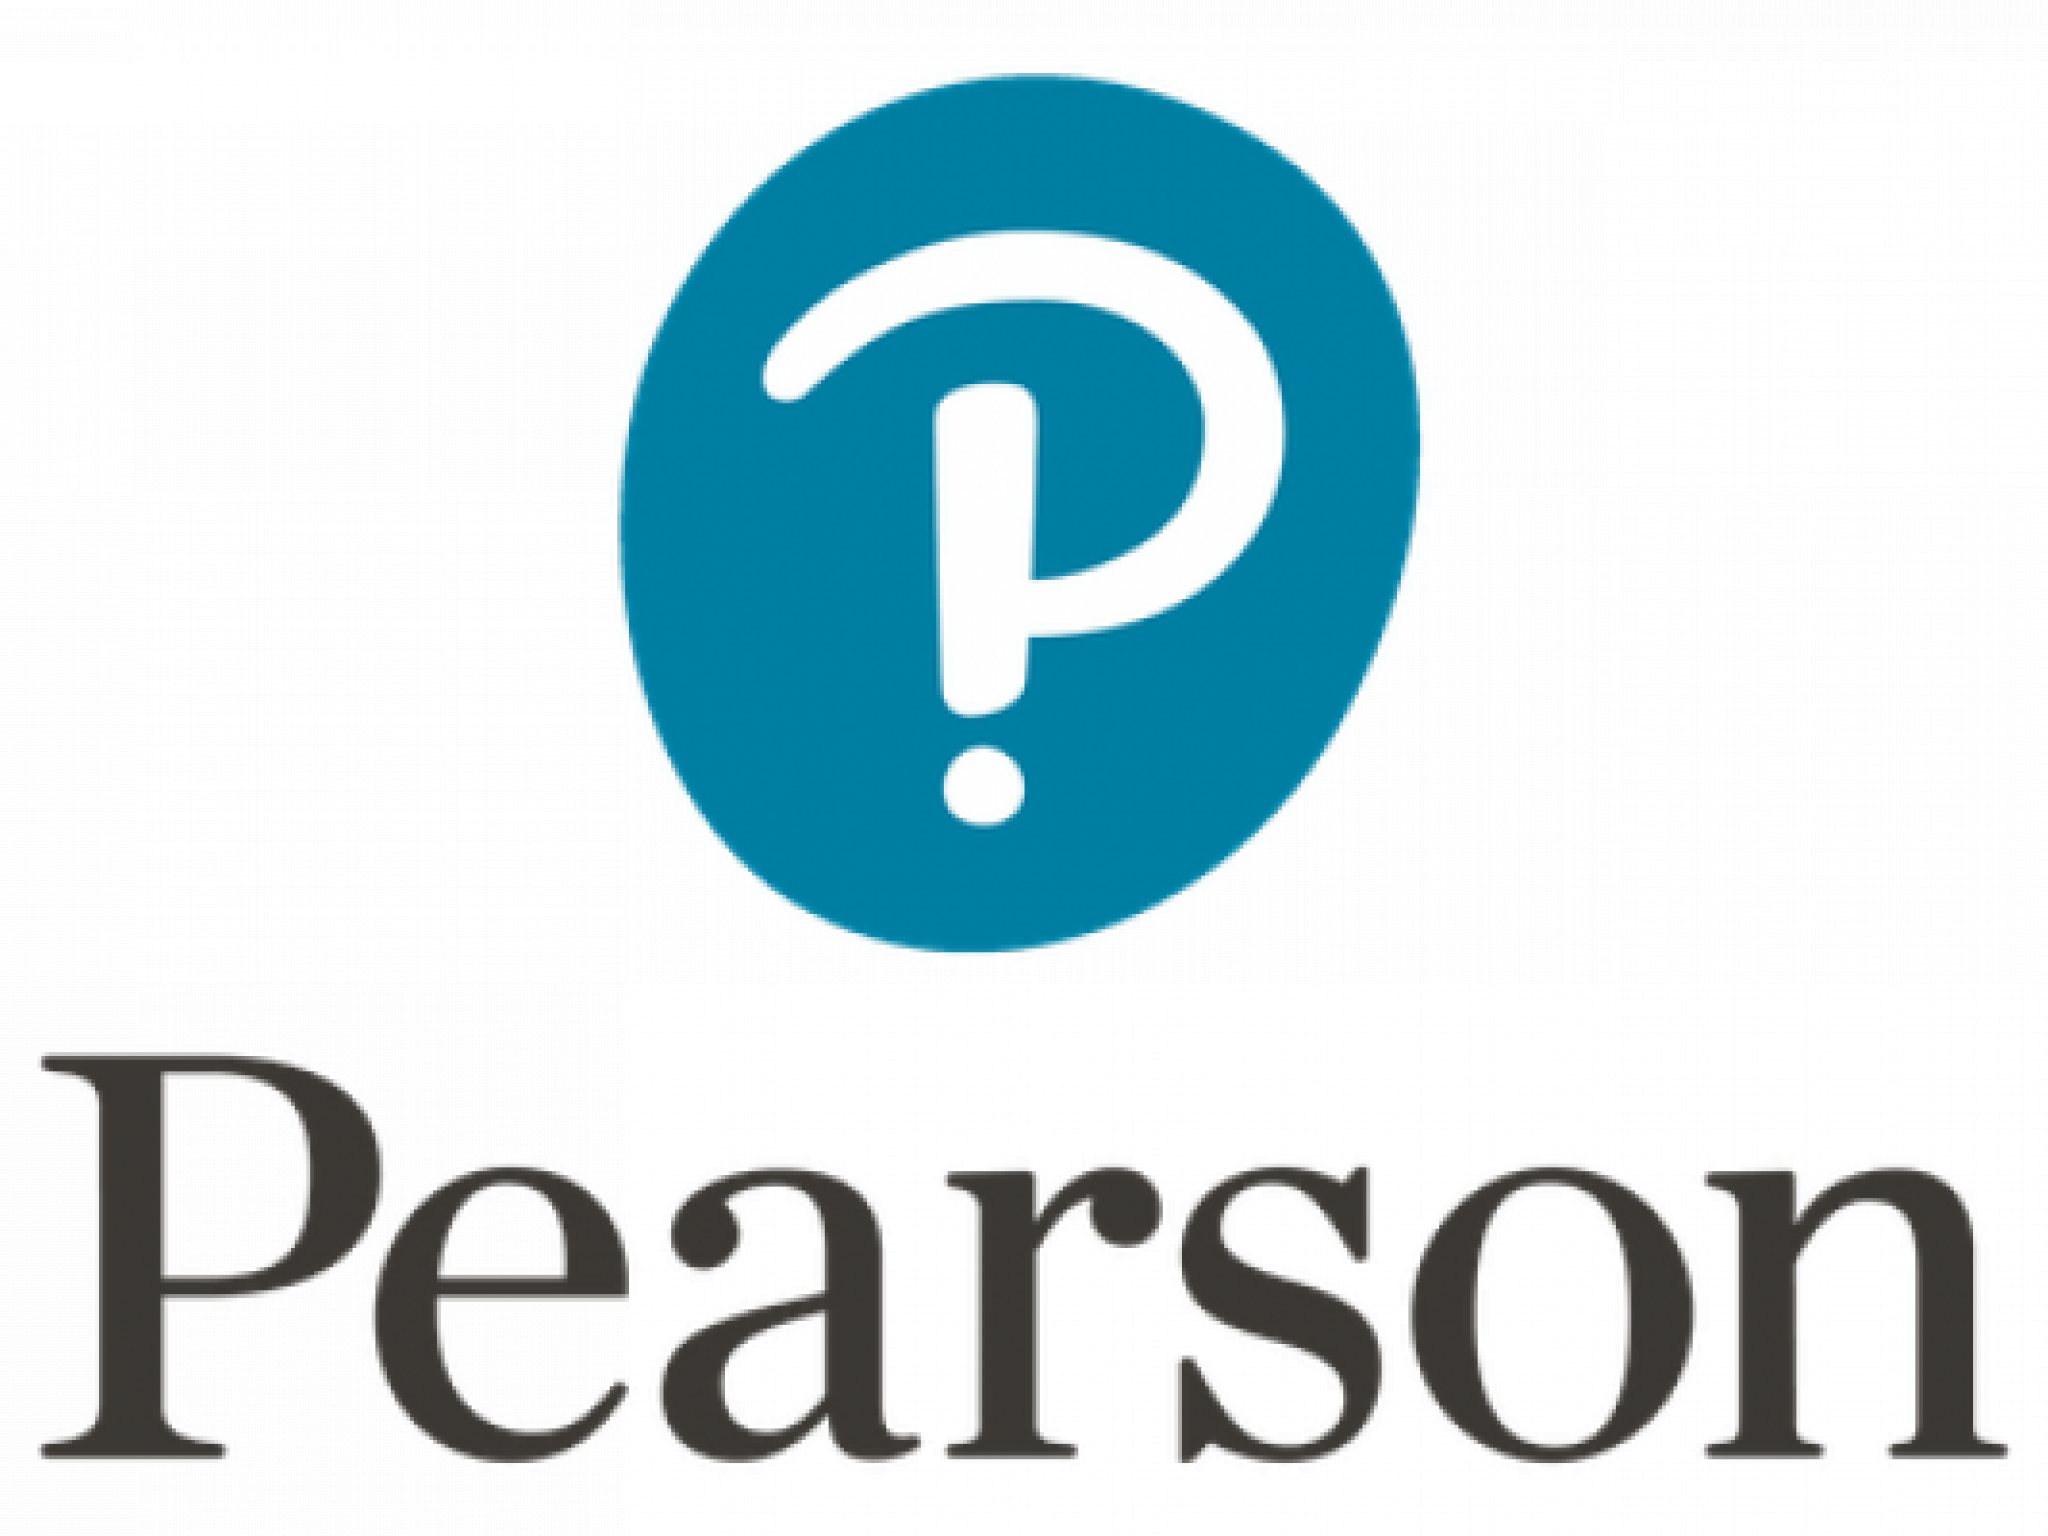  pearson-nikola-and-some-other-big-gainers-from-monday 